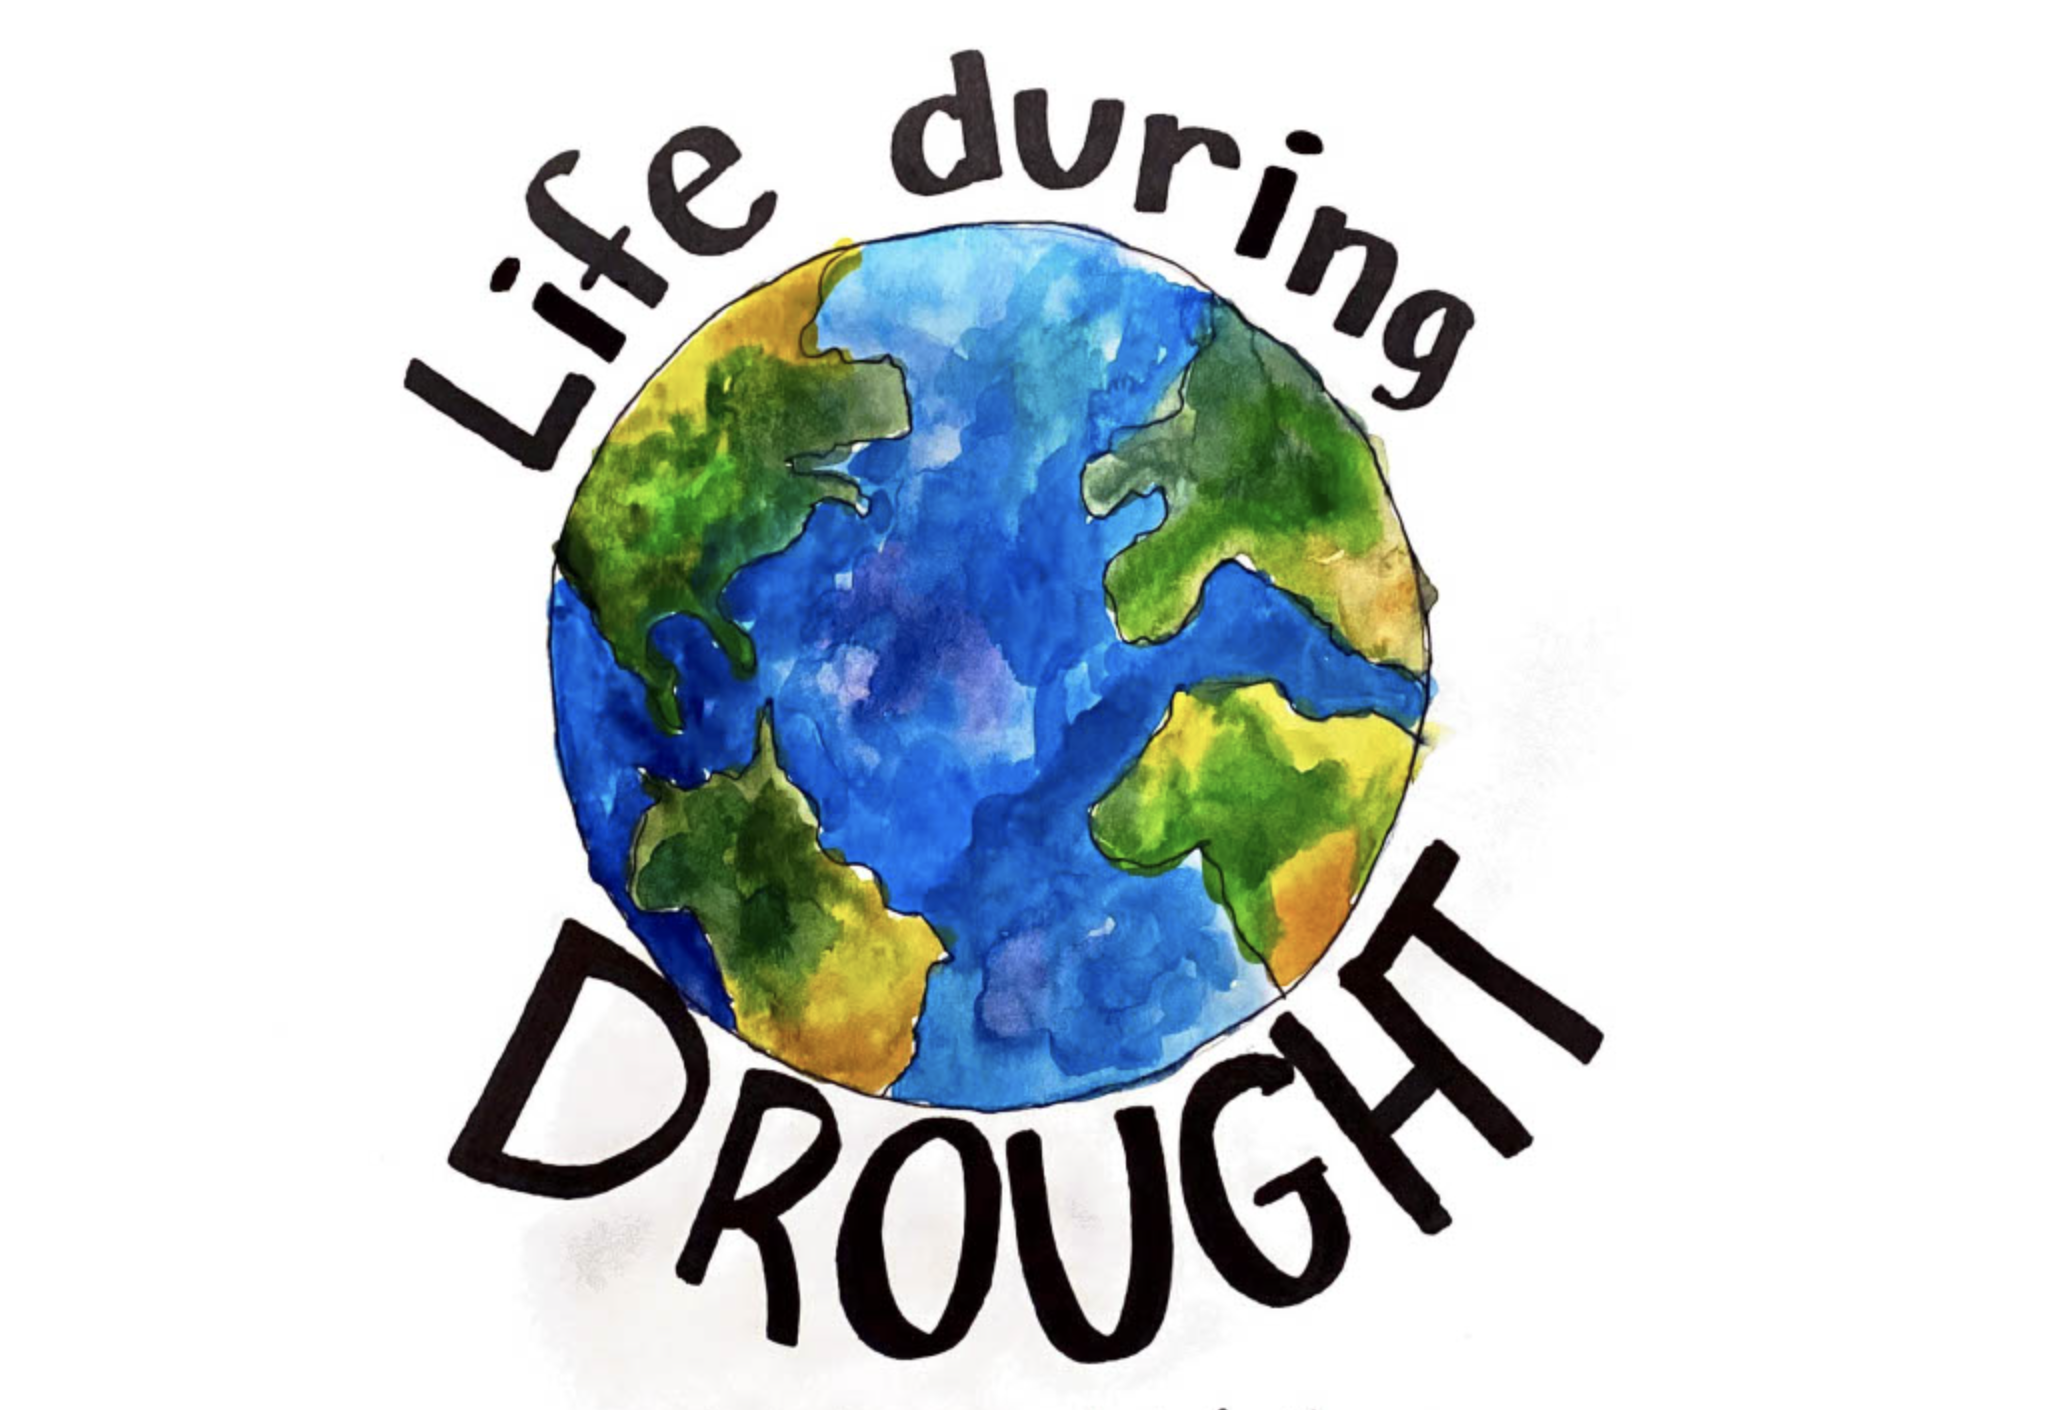 ‘Life During Drought:’ Illustrated children’s book